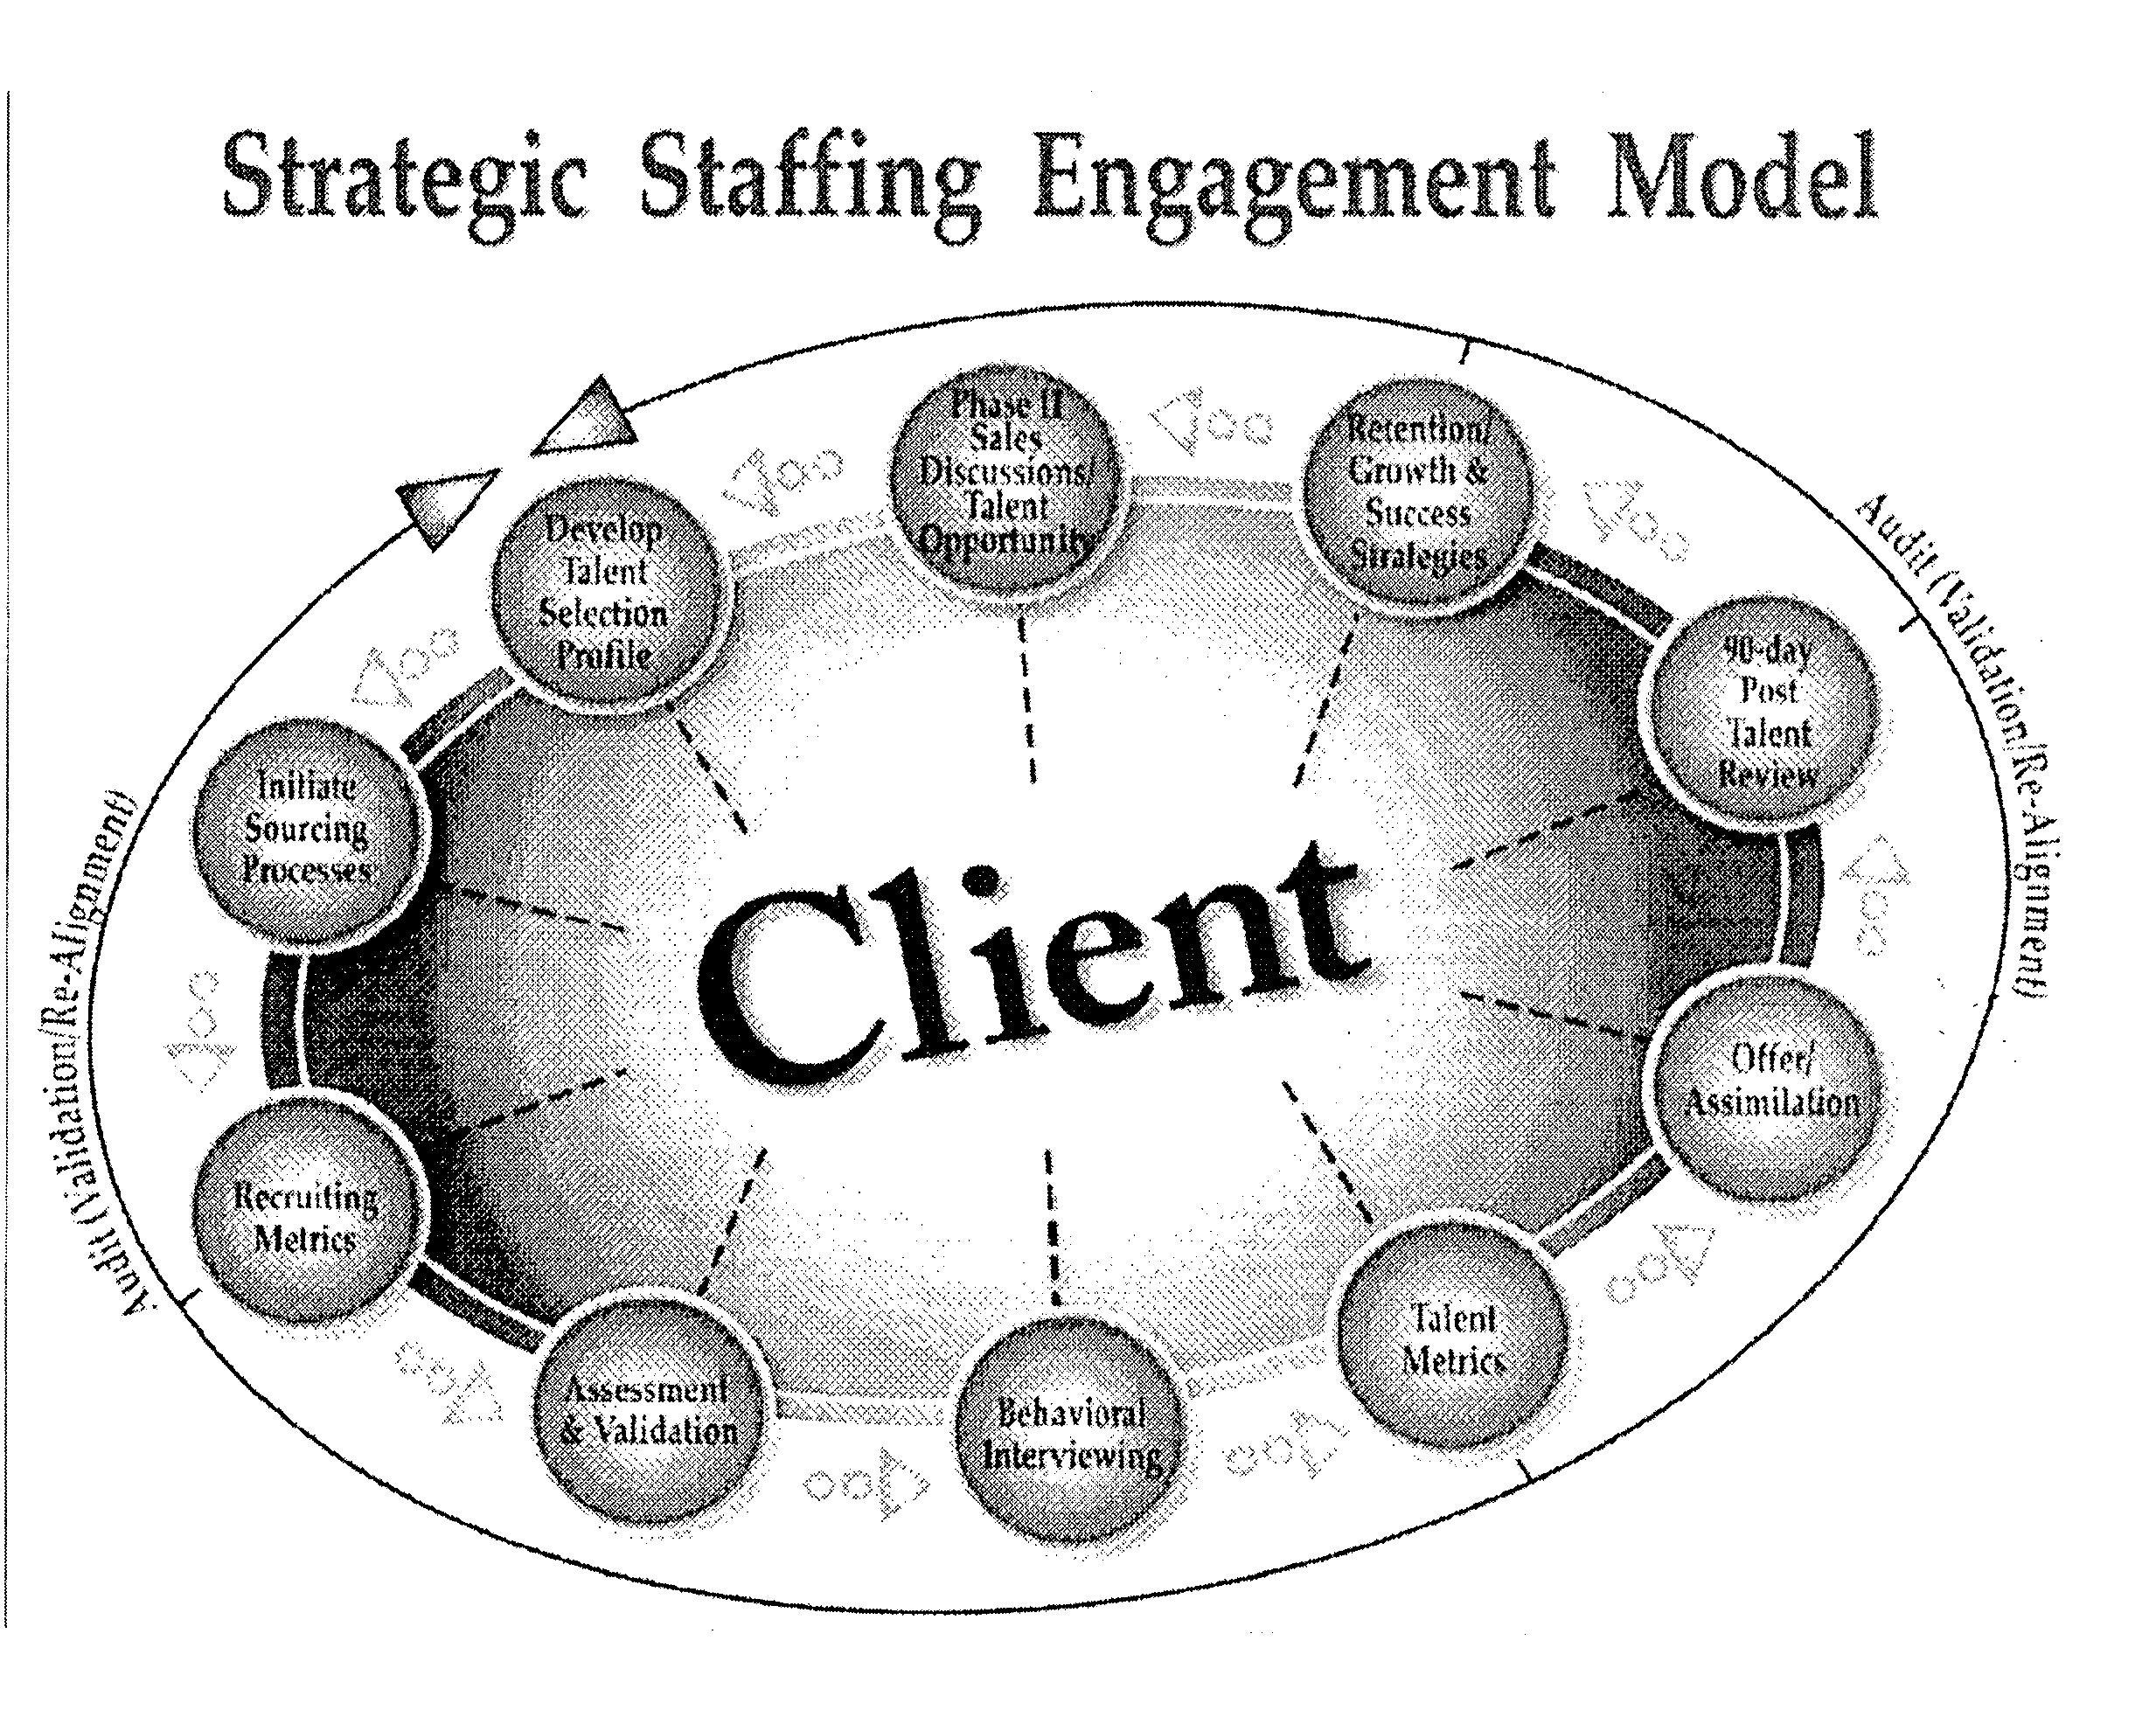  STRATEGIC STAFFING ENGAGEMENT MODEL CLIENT AUDIT (VALIDATION/RE-ALIGNMENT) AUDIT (VALIDATION/RE-ALIGNMENT) PHASE II SALES DISCUS